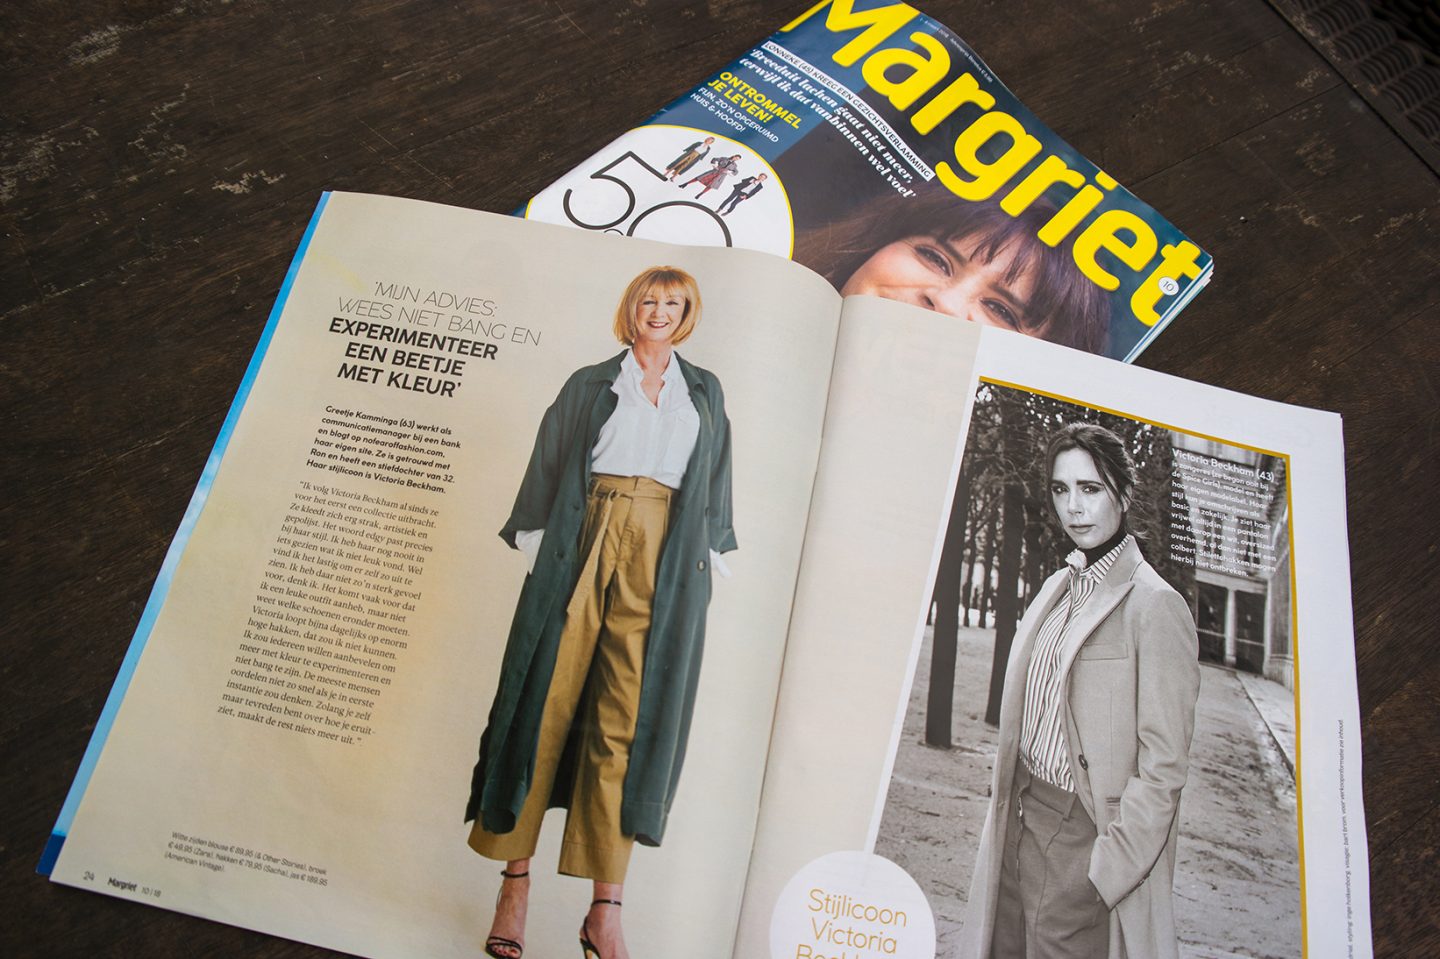 No Fear of Fashion in Margriet